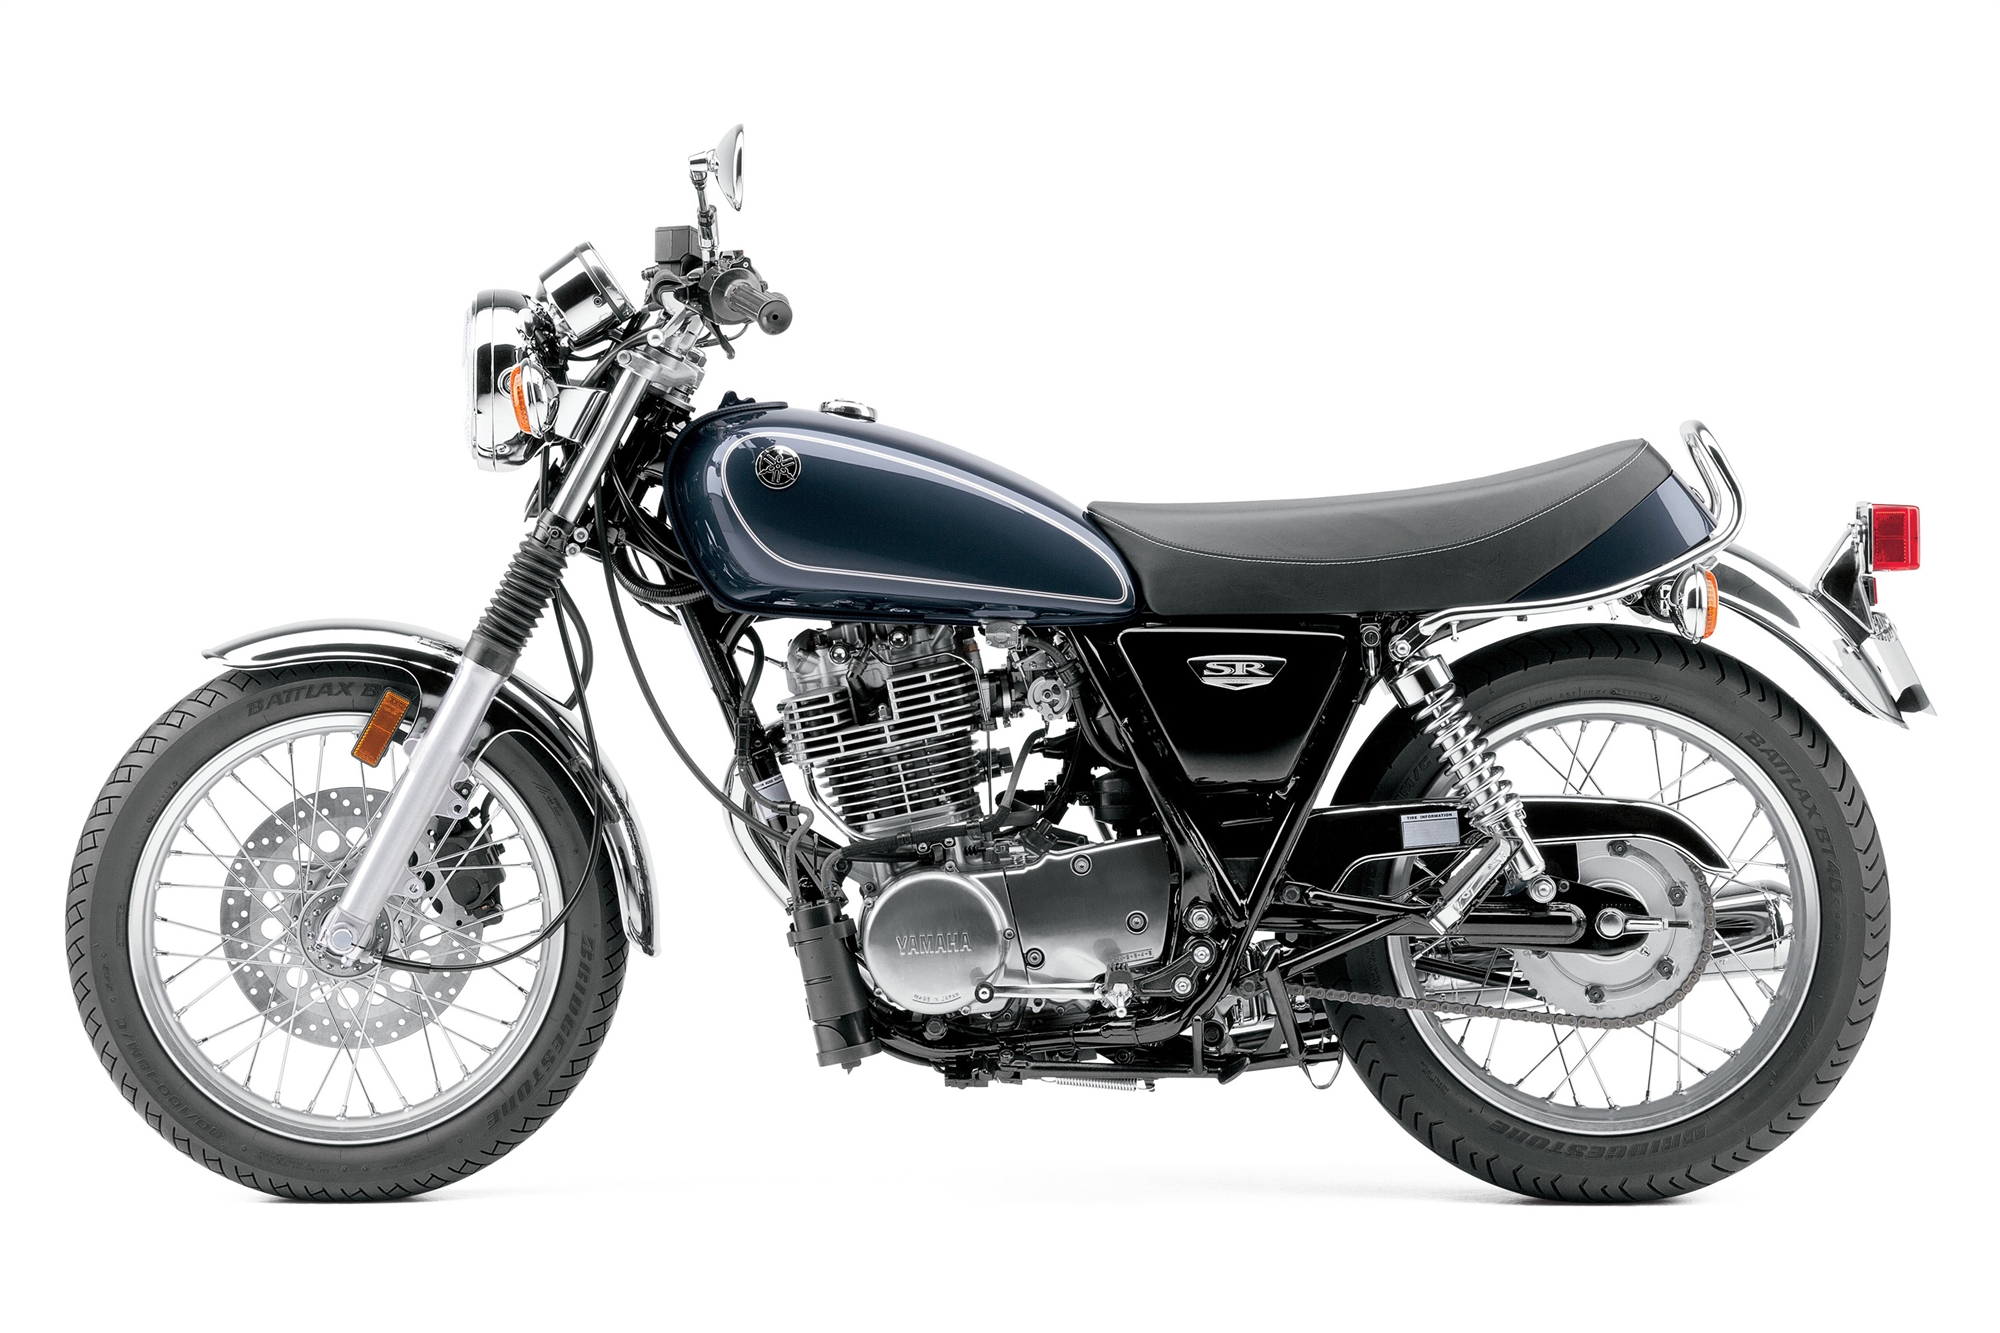 2015 Yamaha SR400 Makes It to the US in May